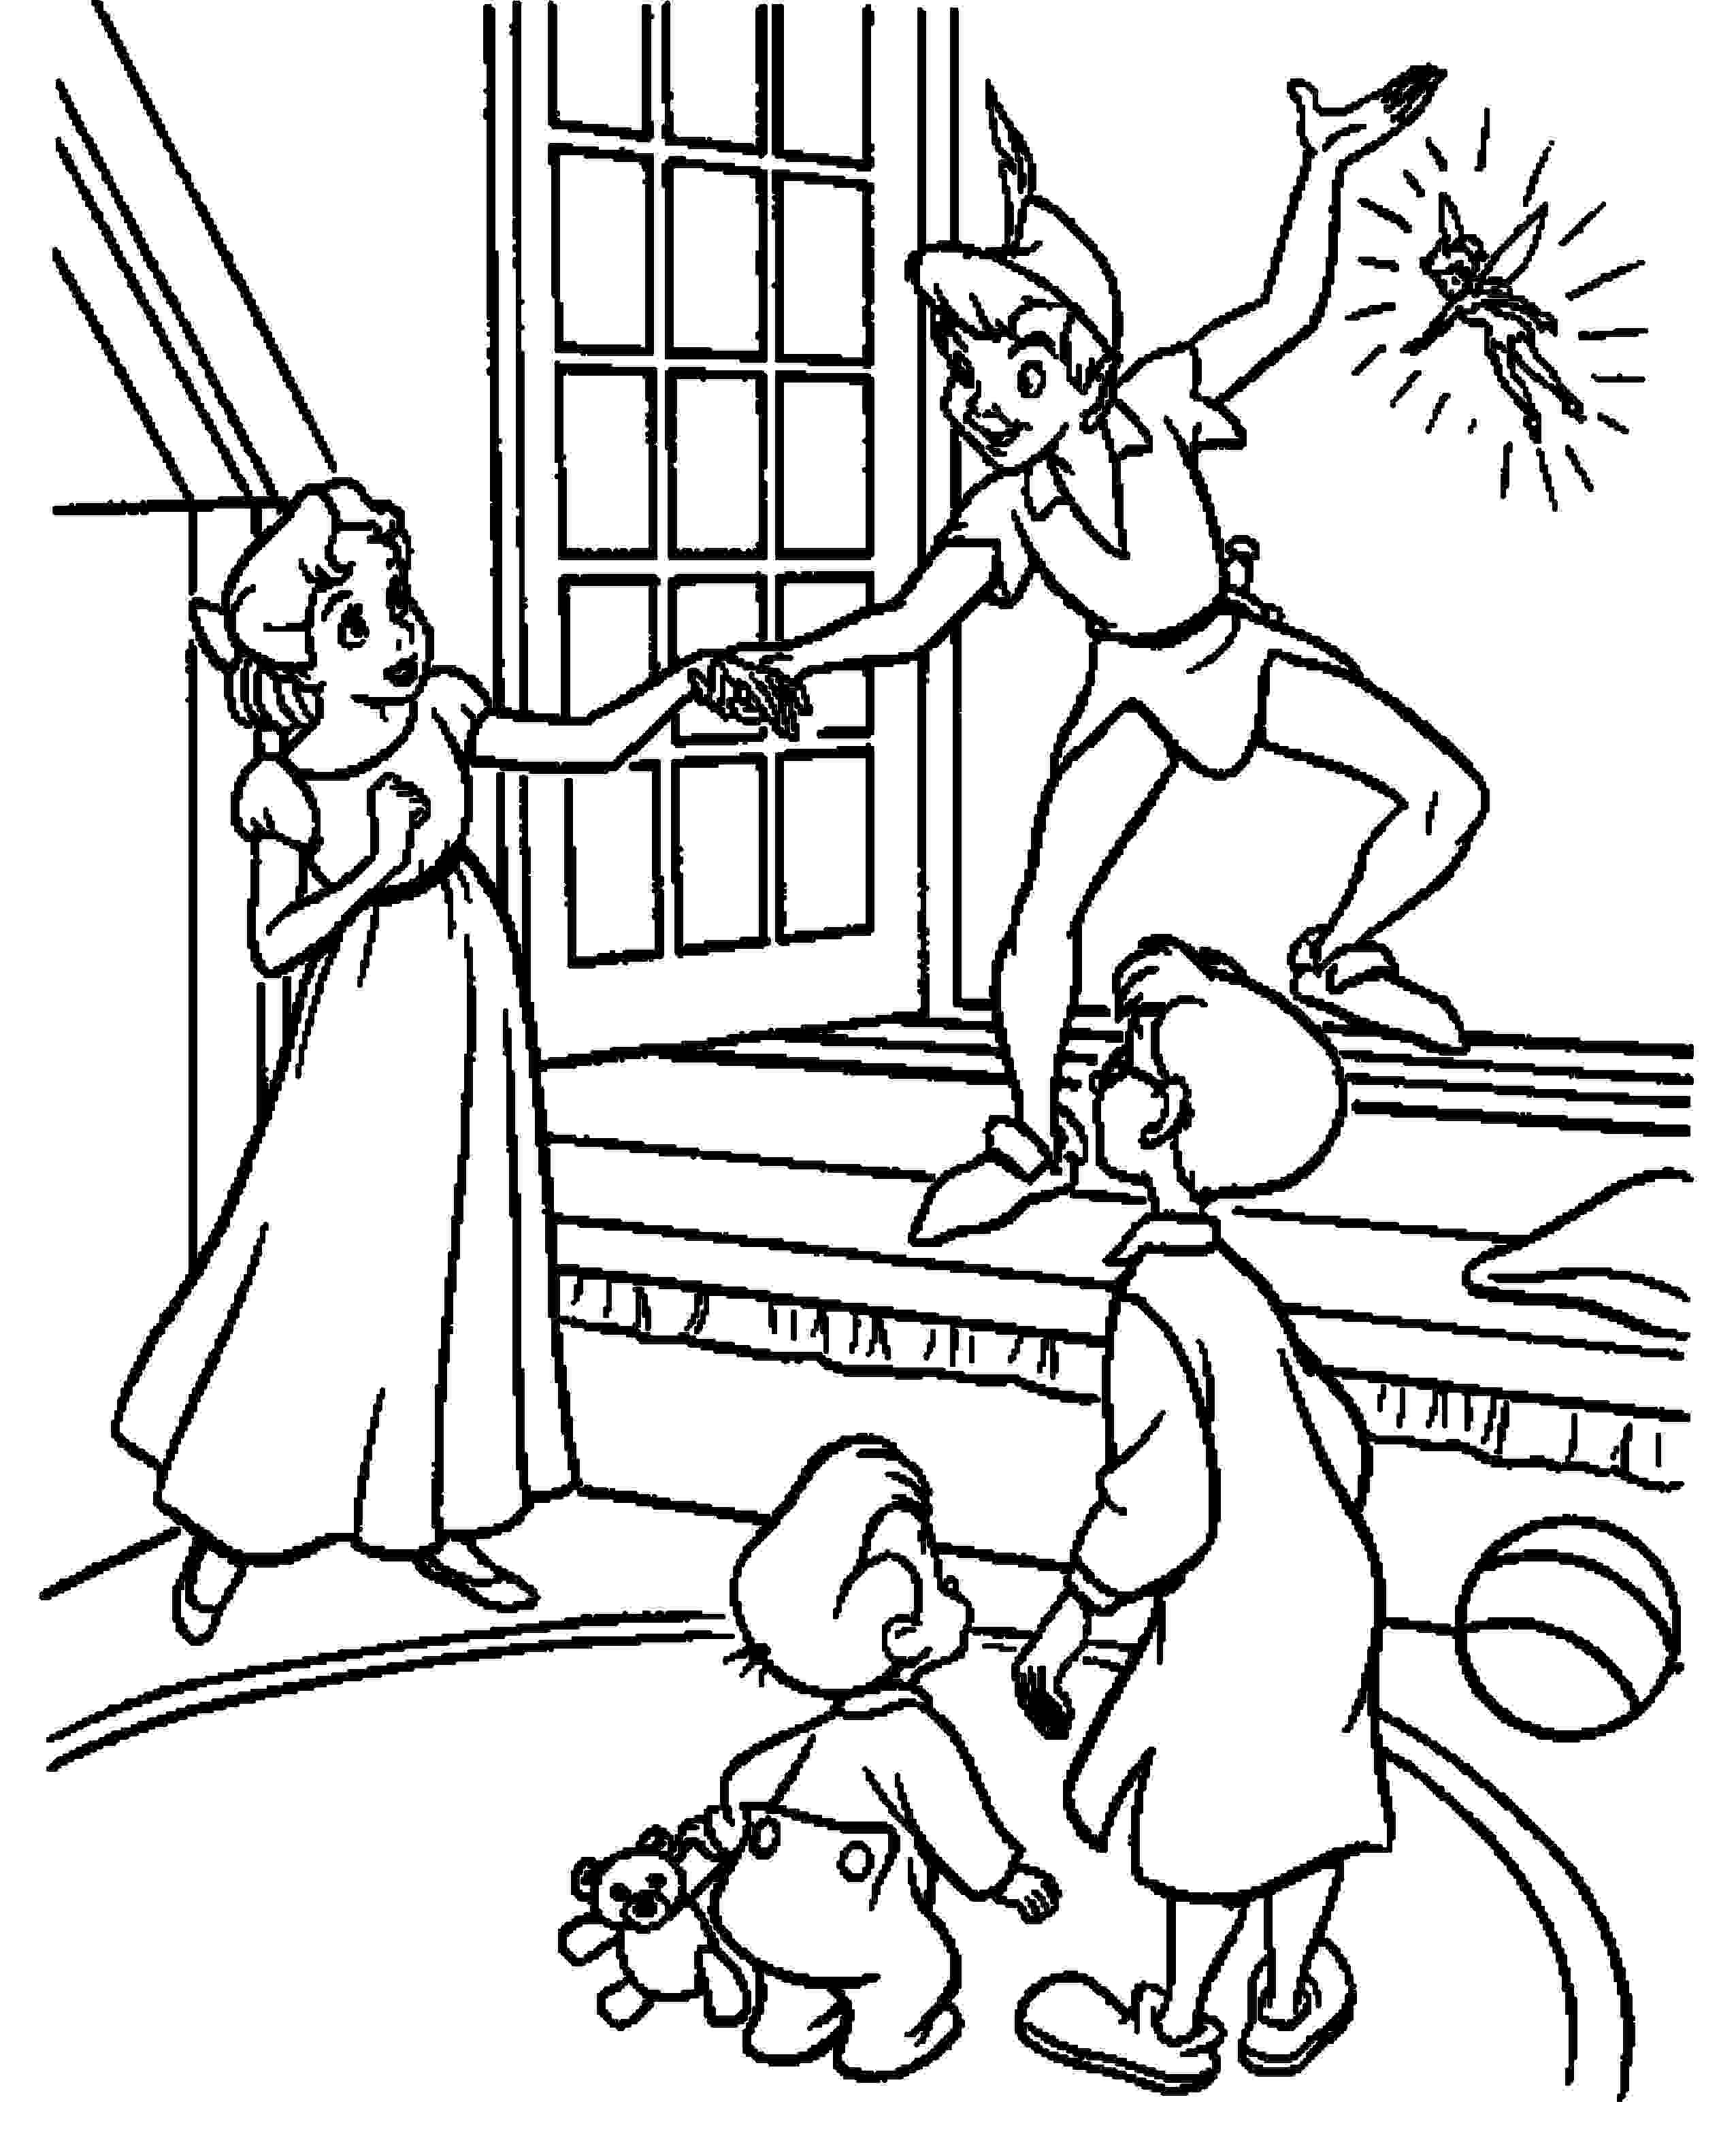 Coloring pages peter pan coloring pages online